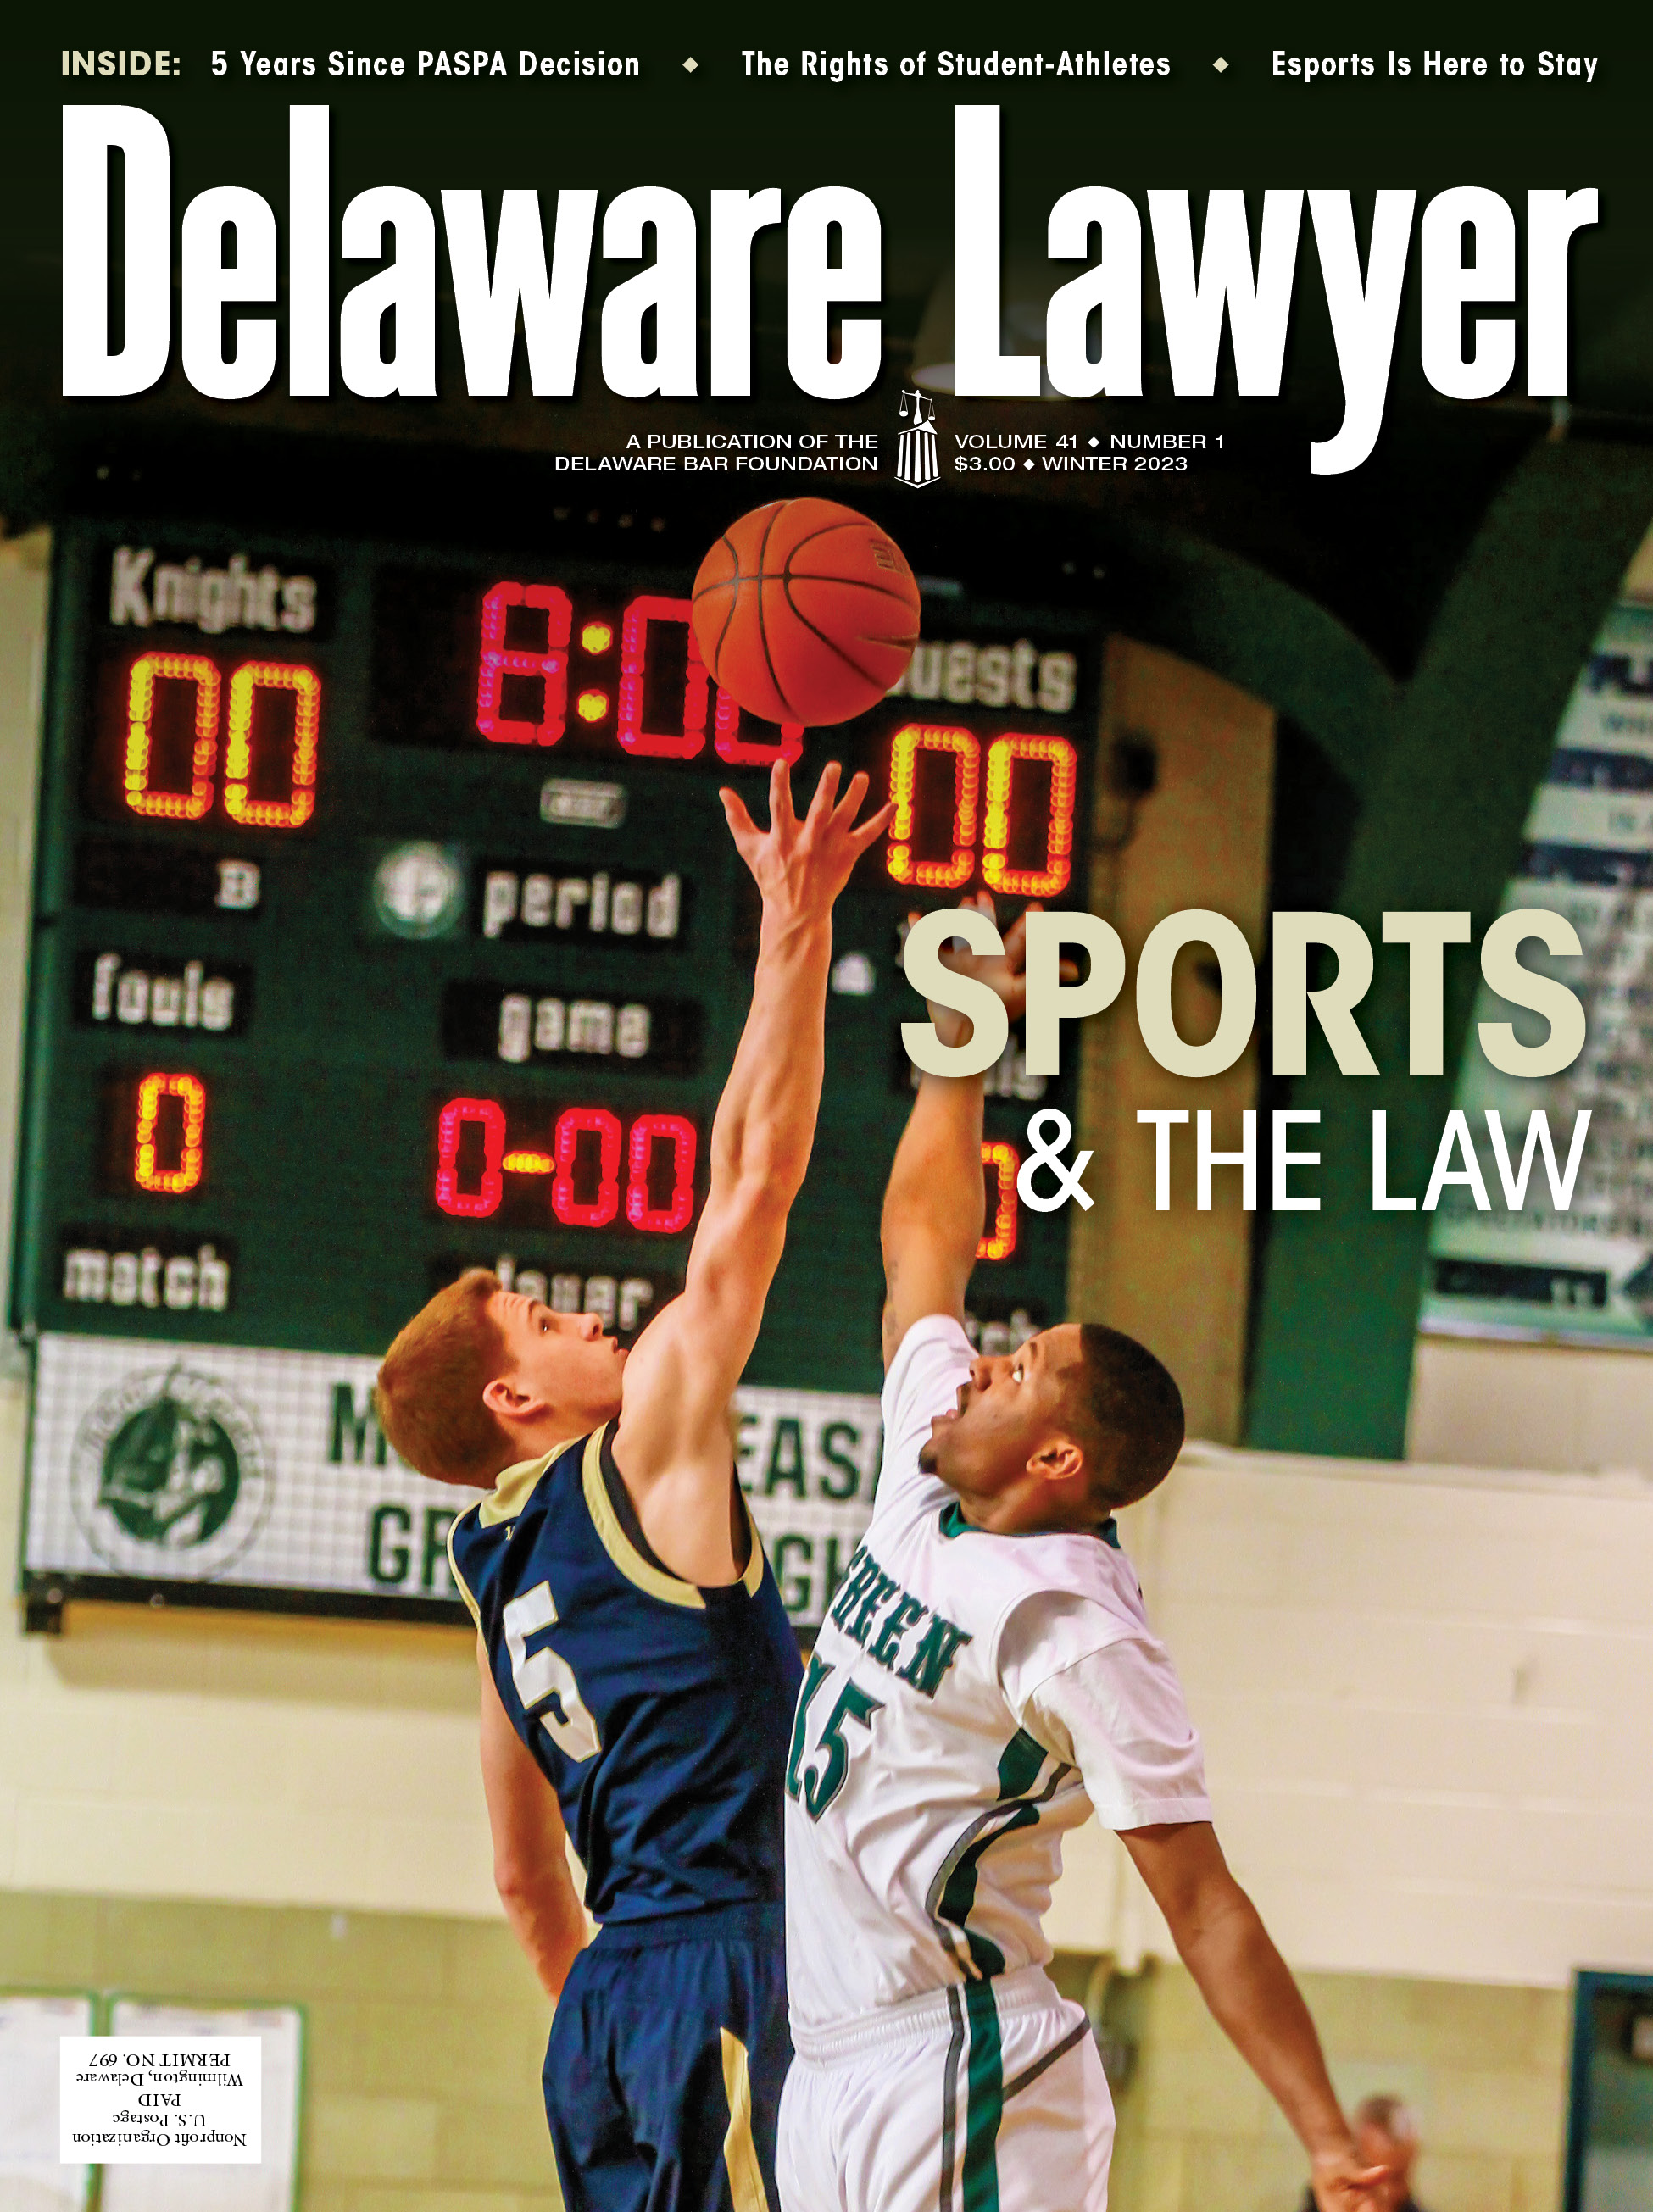 SPORTS & THE LAW